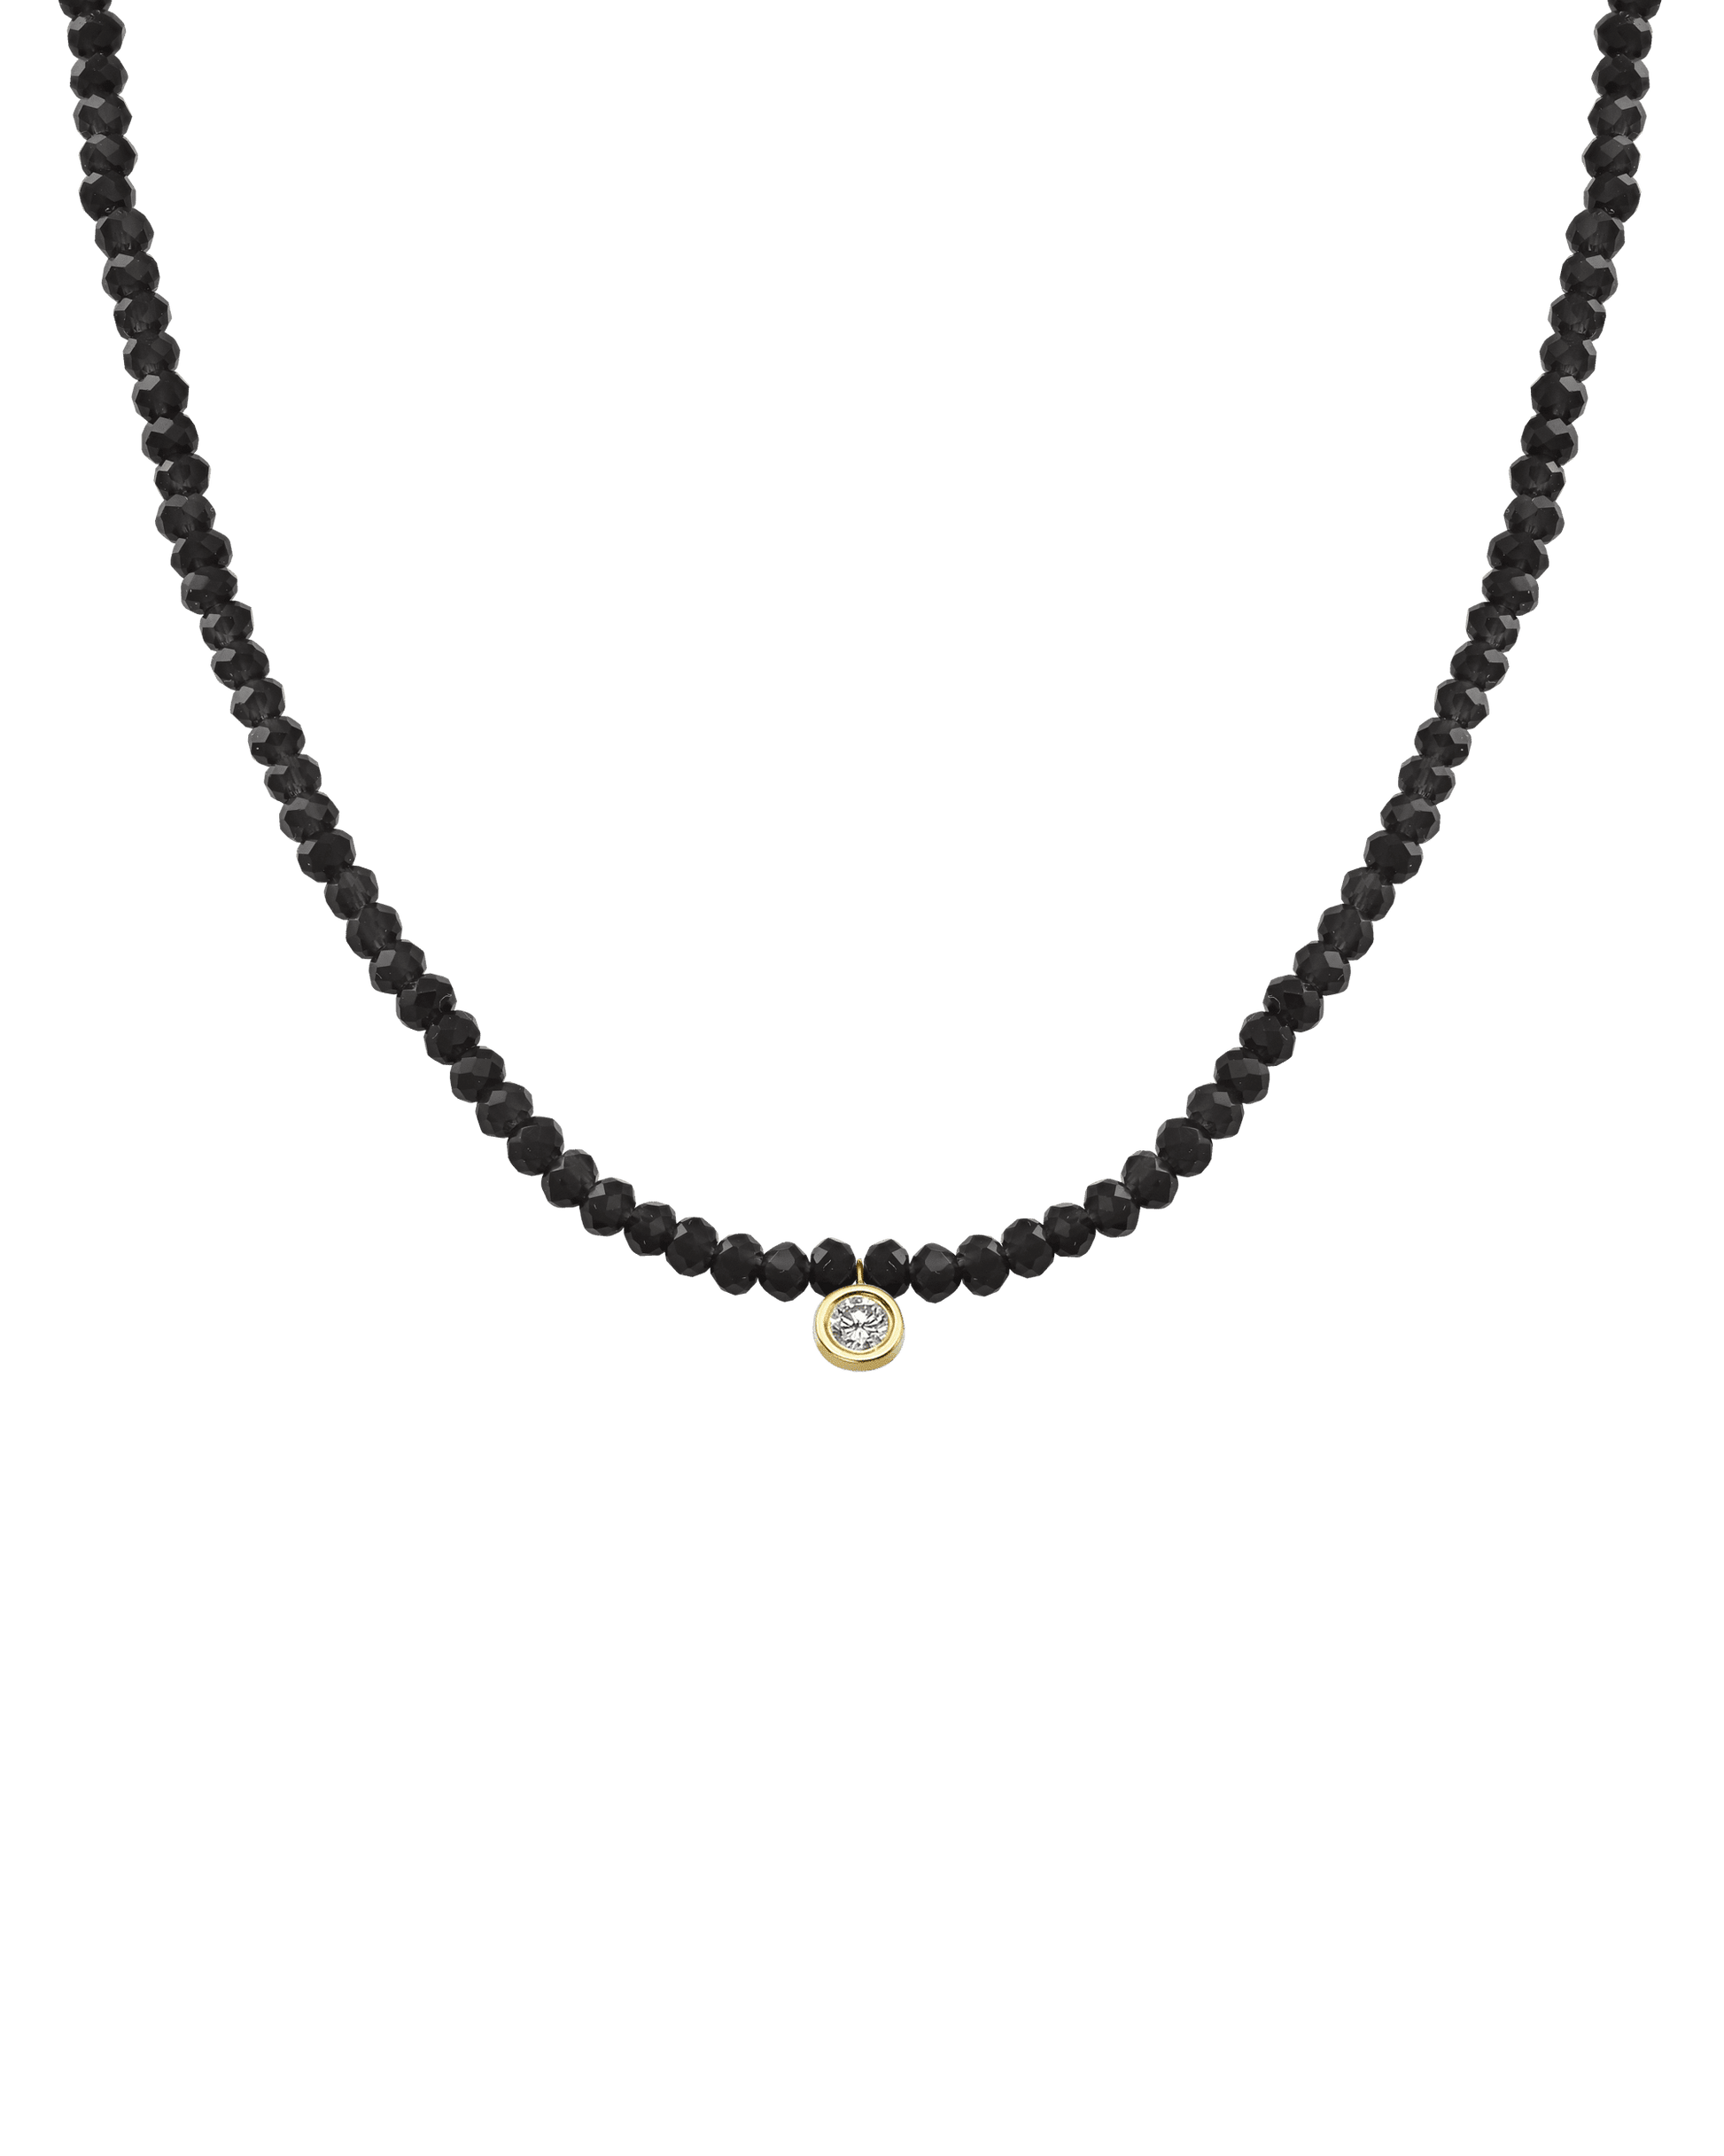 The Gemstone & Diamond Necklace - 14K Yellow Gold Necklaces 14K Solid Gold Glass Beads Black Spinnel Large: 0.1ct 14"